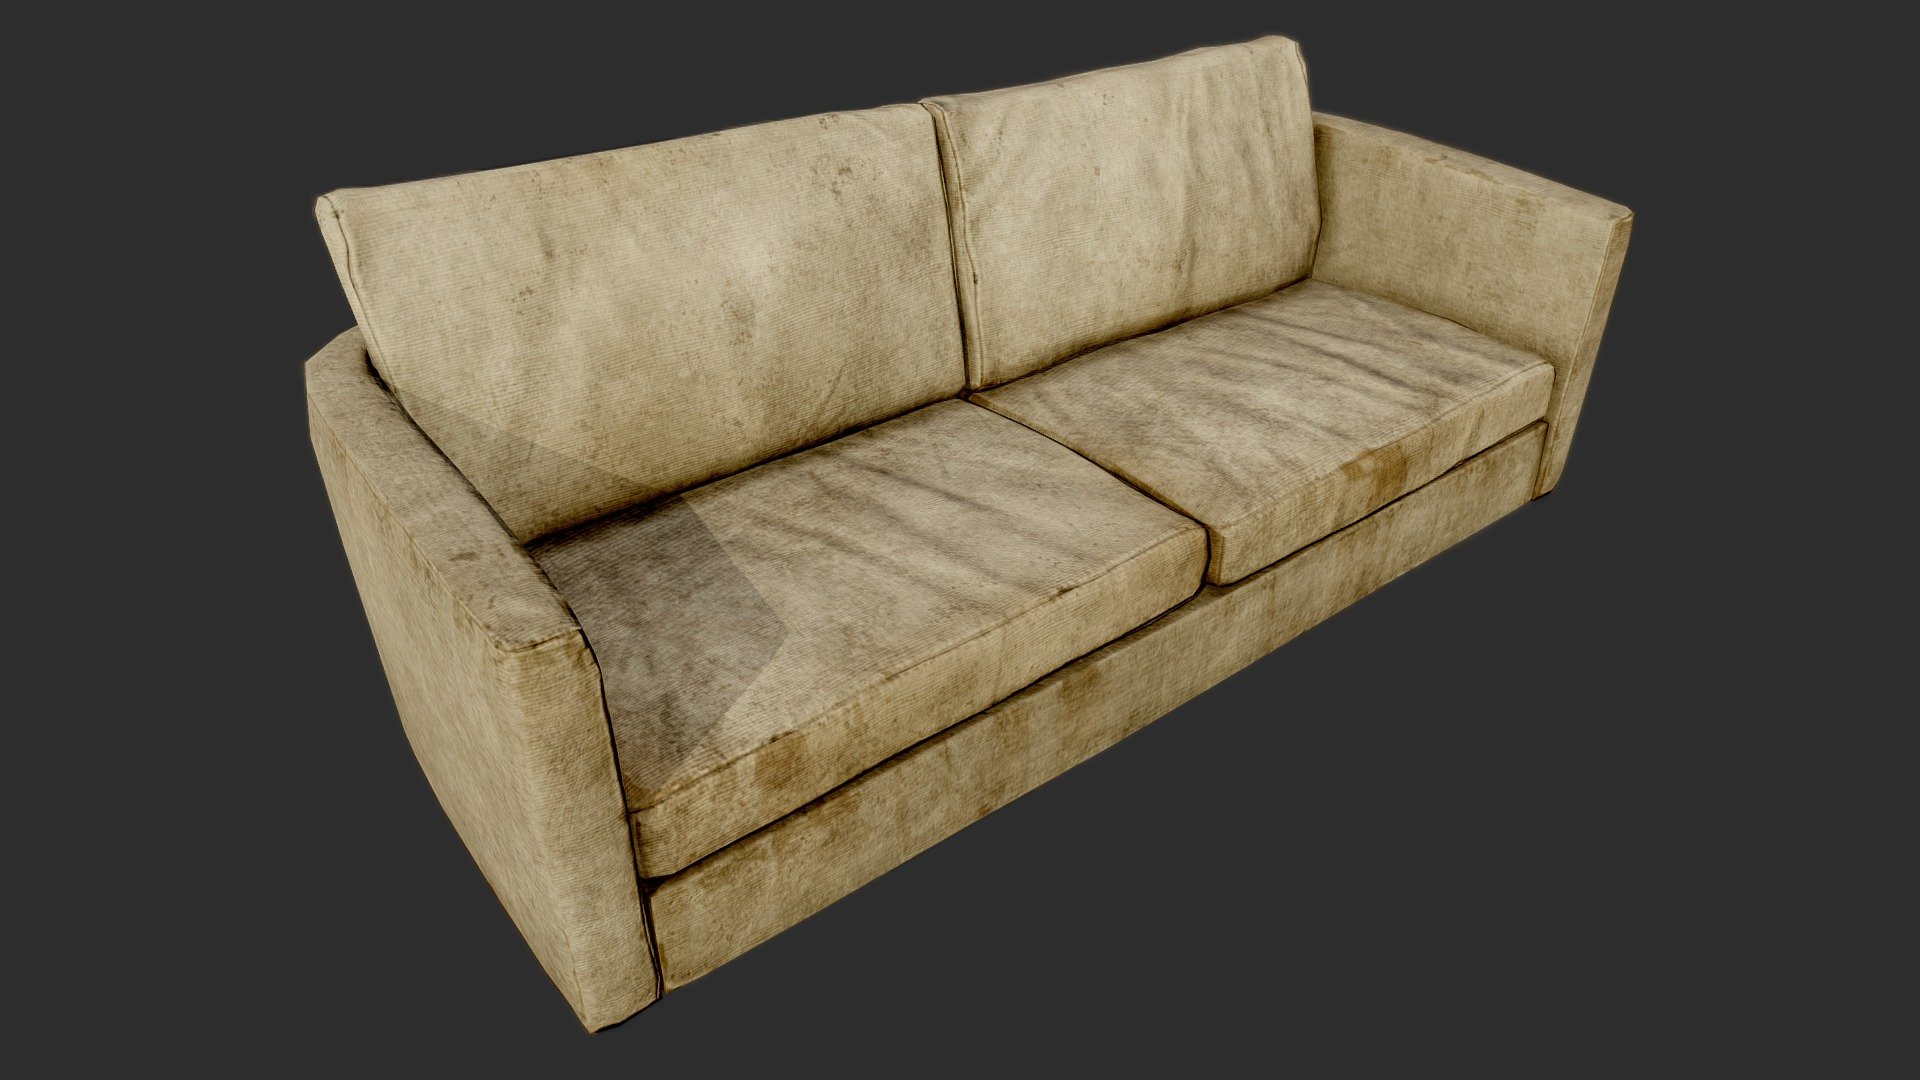 Old Dirty Couch 02 Beige - PBR

Very Detailed Low Poly Beige Old Cotton Couch / Sofa with High-Quality PBR Textures.

Fits perfect for any PBR game as Decoration etc. like Post Apocalyptic Environment or Horror Games for example

Created with 3DSMAX, Zbrush and Substance Painter.

Standard Textures
Base Color, Metallic, Roughness, Height, AO, Normal, Maps

Unreal 4 Textures
Base Color, Normal, OcclusionRoughnessMetallic

Unity 5/2017 Textures
Albedo, SpecularSmoothness, Normal, and AO Maps

2 x 4096x4096 TGA Textures

Please Note, this PBR Textures Only. 

Low Poly Triangles 

3778 Tris
1901 Verts

File Formats :

.Max2018
.Max2017
.Max2016
.Max2015
.FBX
.OBJ
.3DS
.DAE - Old Dirty Couch 02 Beige - PBR - Buy Royalty Free 3D model by GamePoly (@triix3d) 3d model